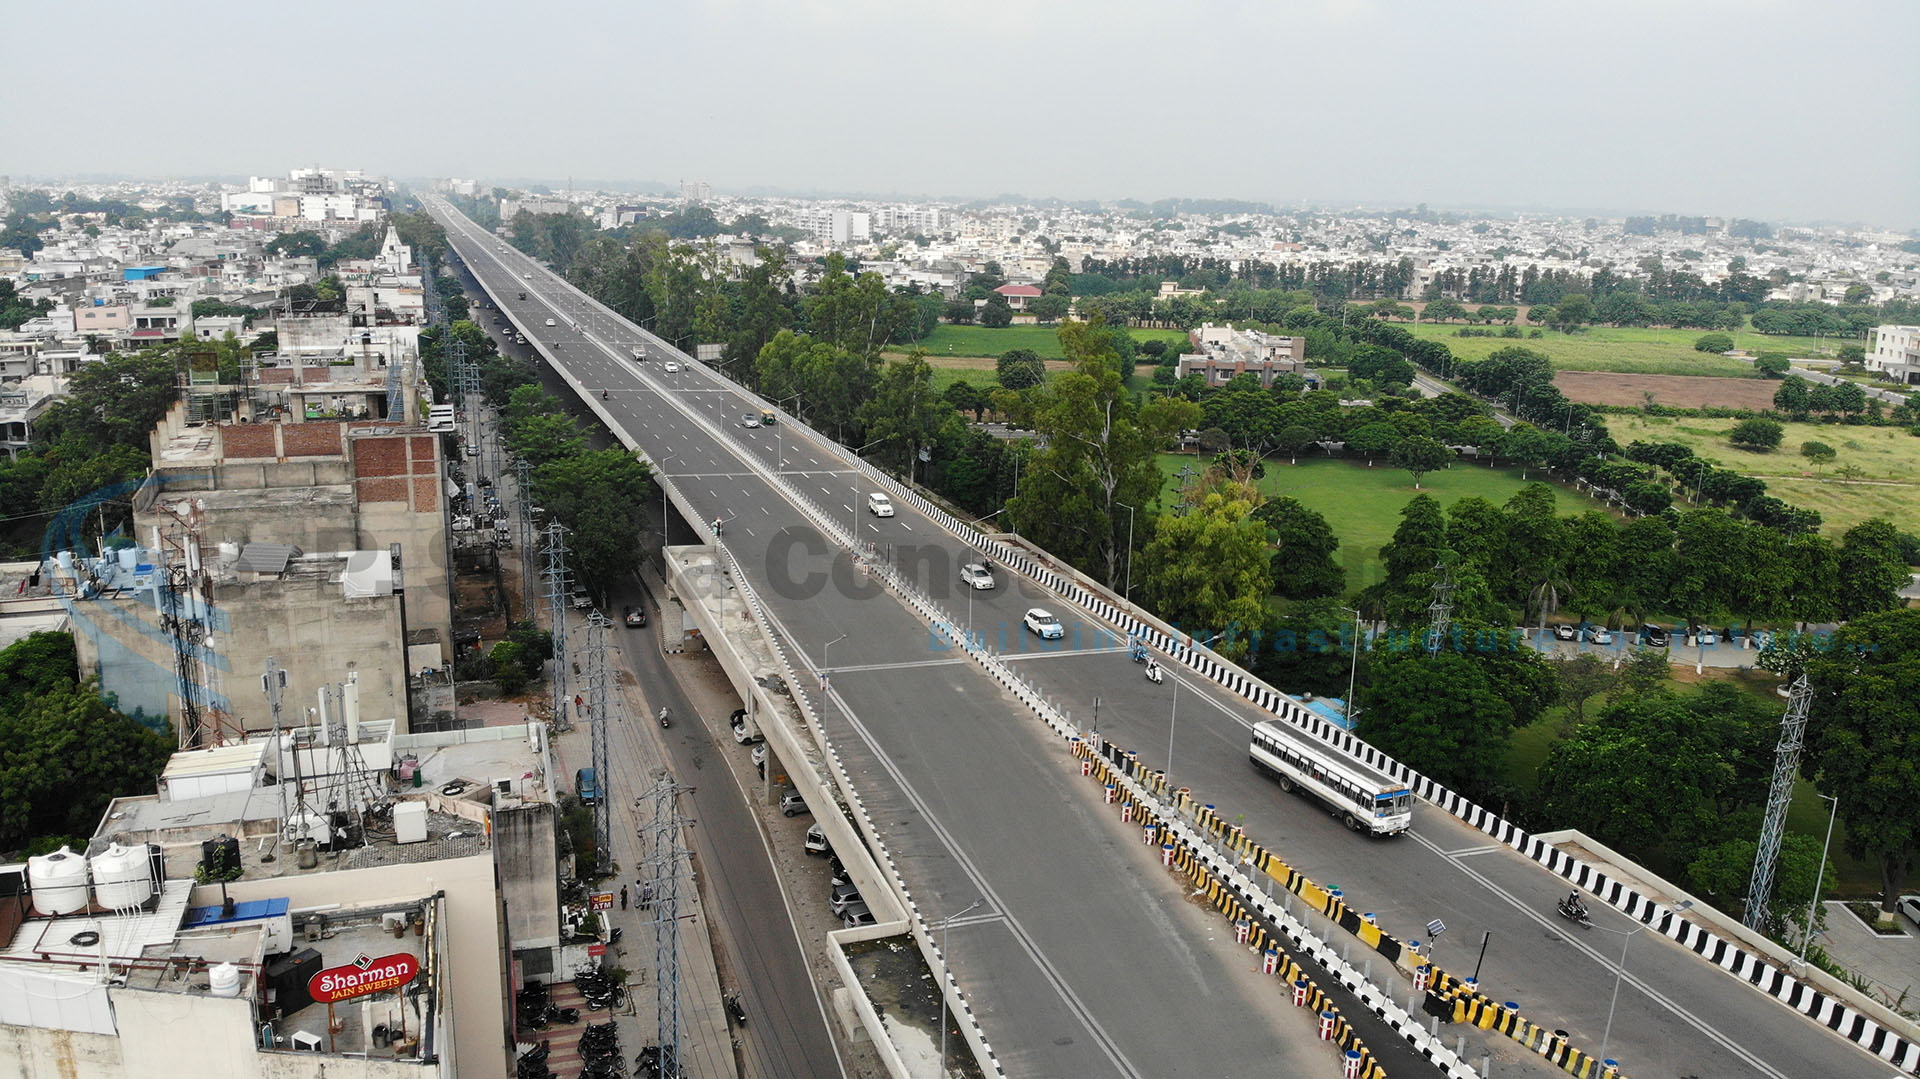 Partially access controlled 4 Lane Elevated Highway between Samrala Chowk to Ludhiana Municipal Limit of NH-95 in Punjab